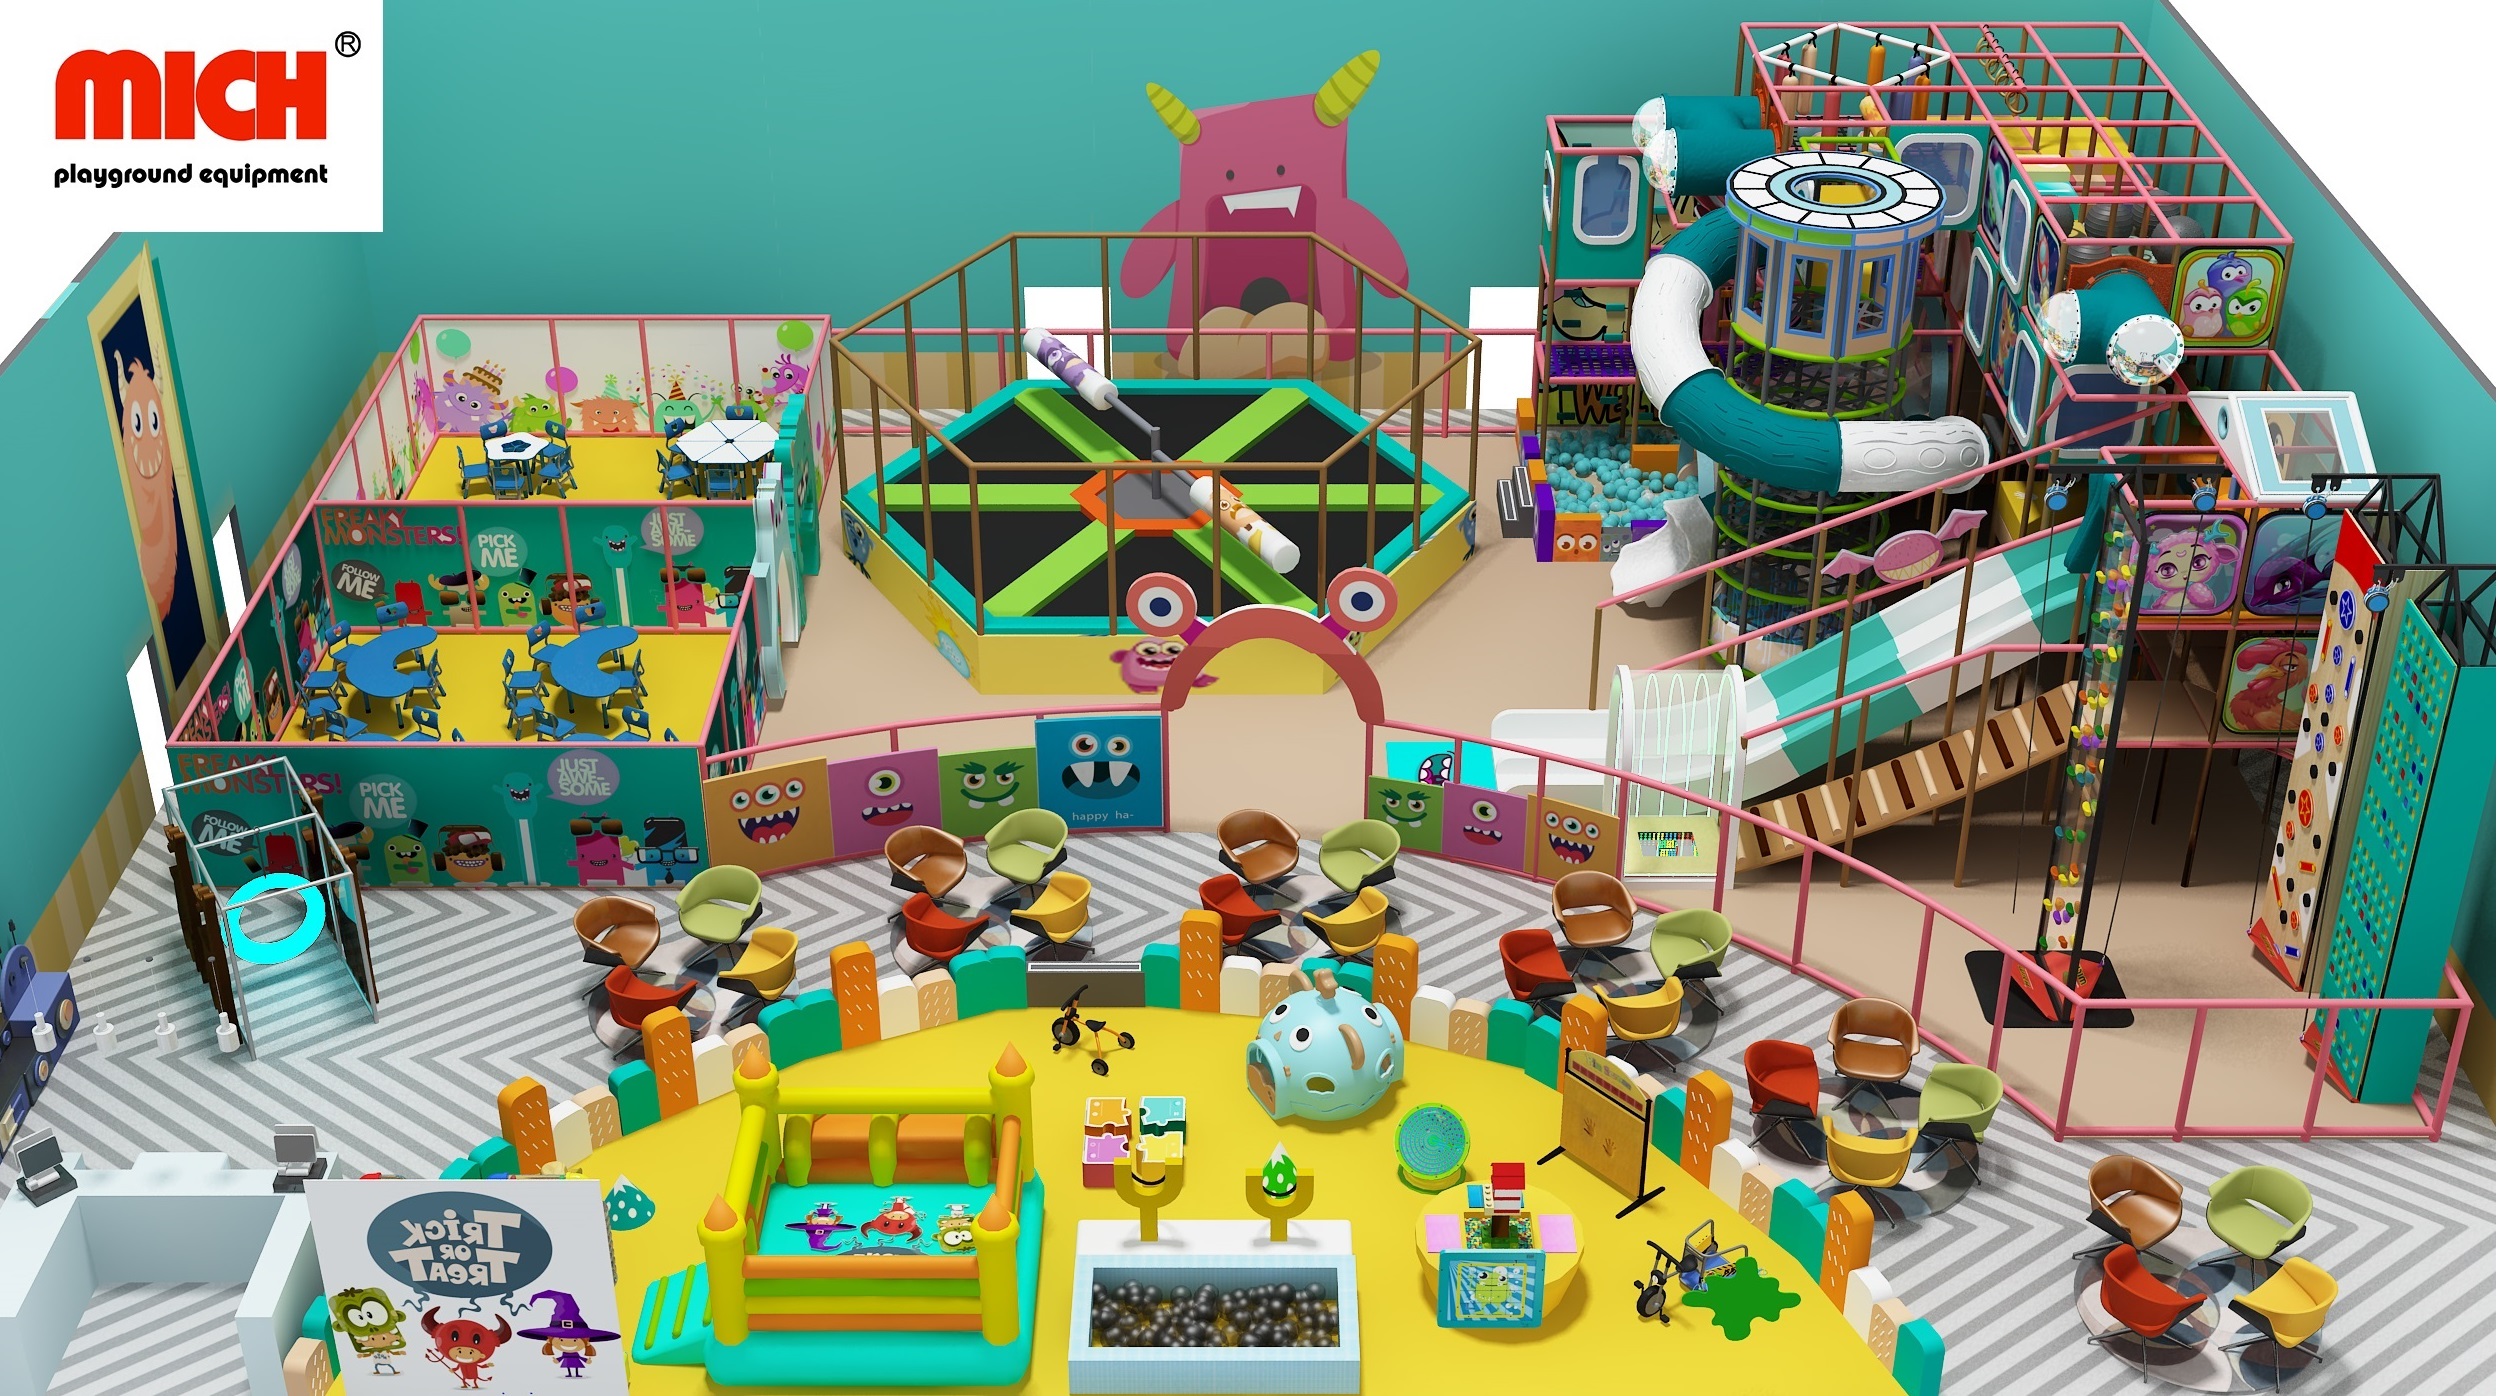 Where can indoor playground equipment be used?